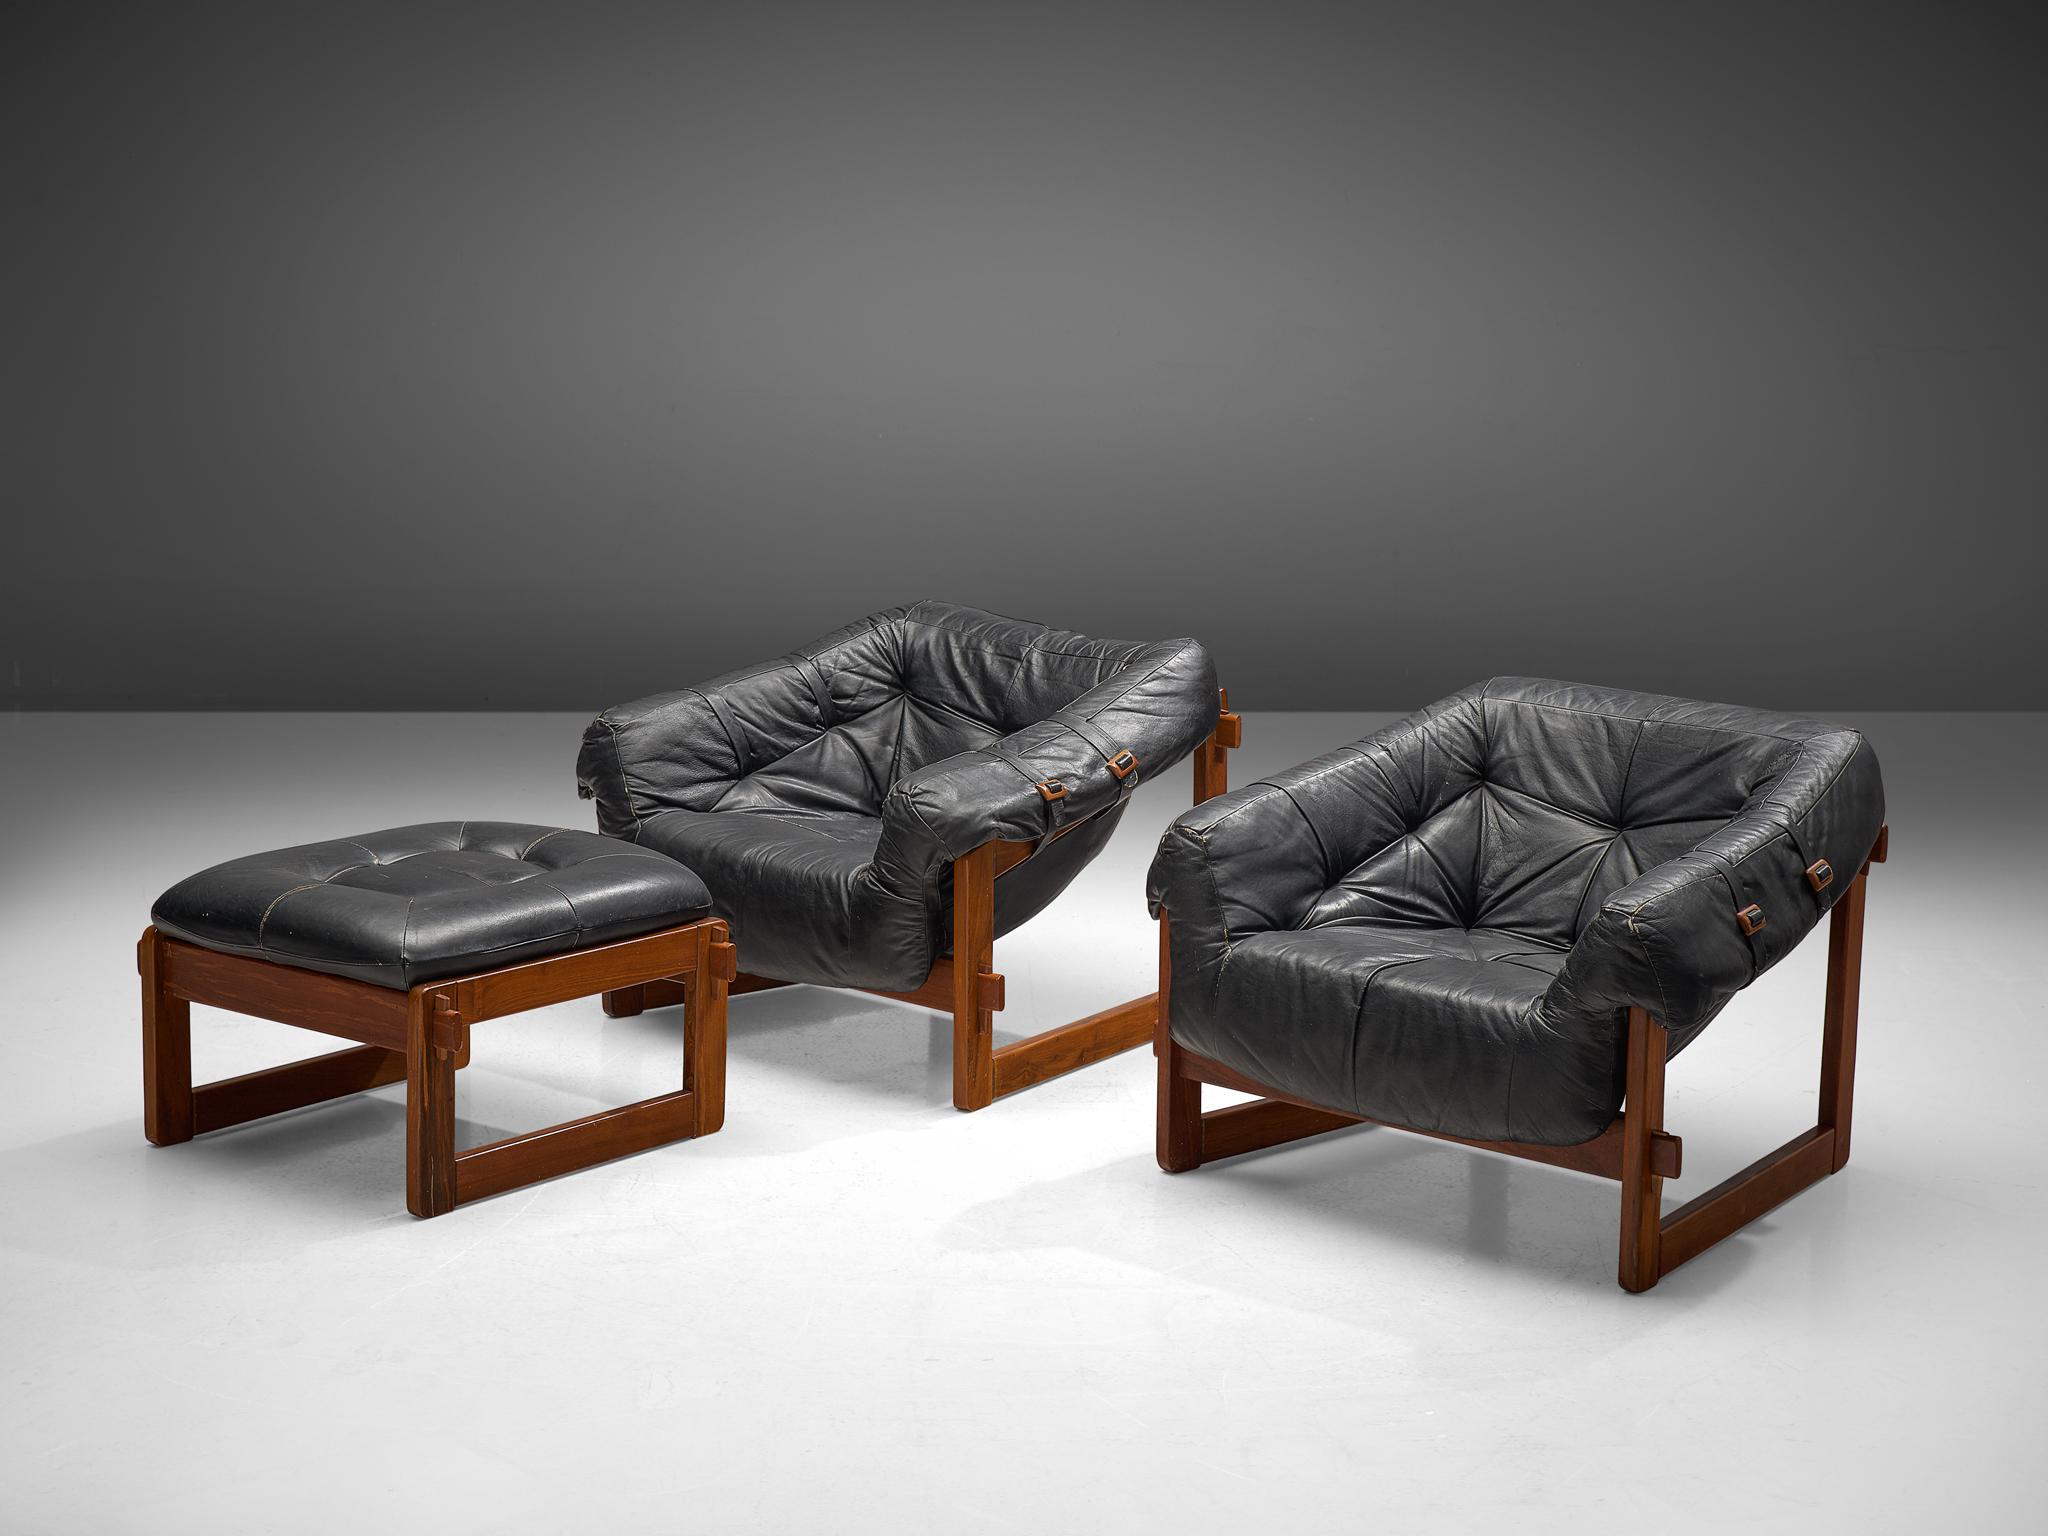 Percival Lafer, set of 2 lounge chairs with ottoman, leather and Brazilian hardwood, Brazil, late 1960s.

Bulky and grand lounge chairs with one stool by Brazilian designer Percival Lafer. This set features a solid dark wooden base with leather